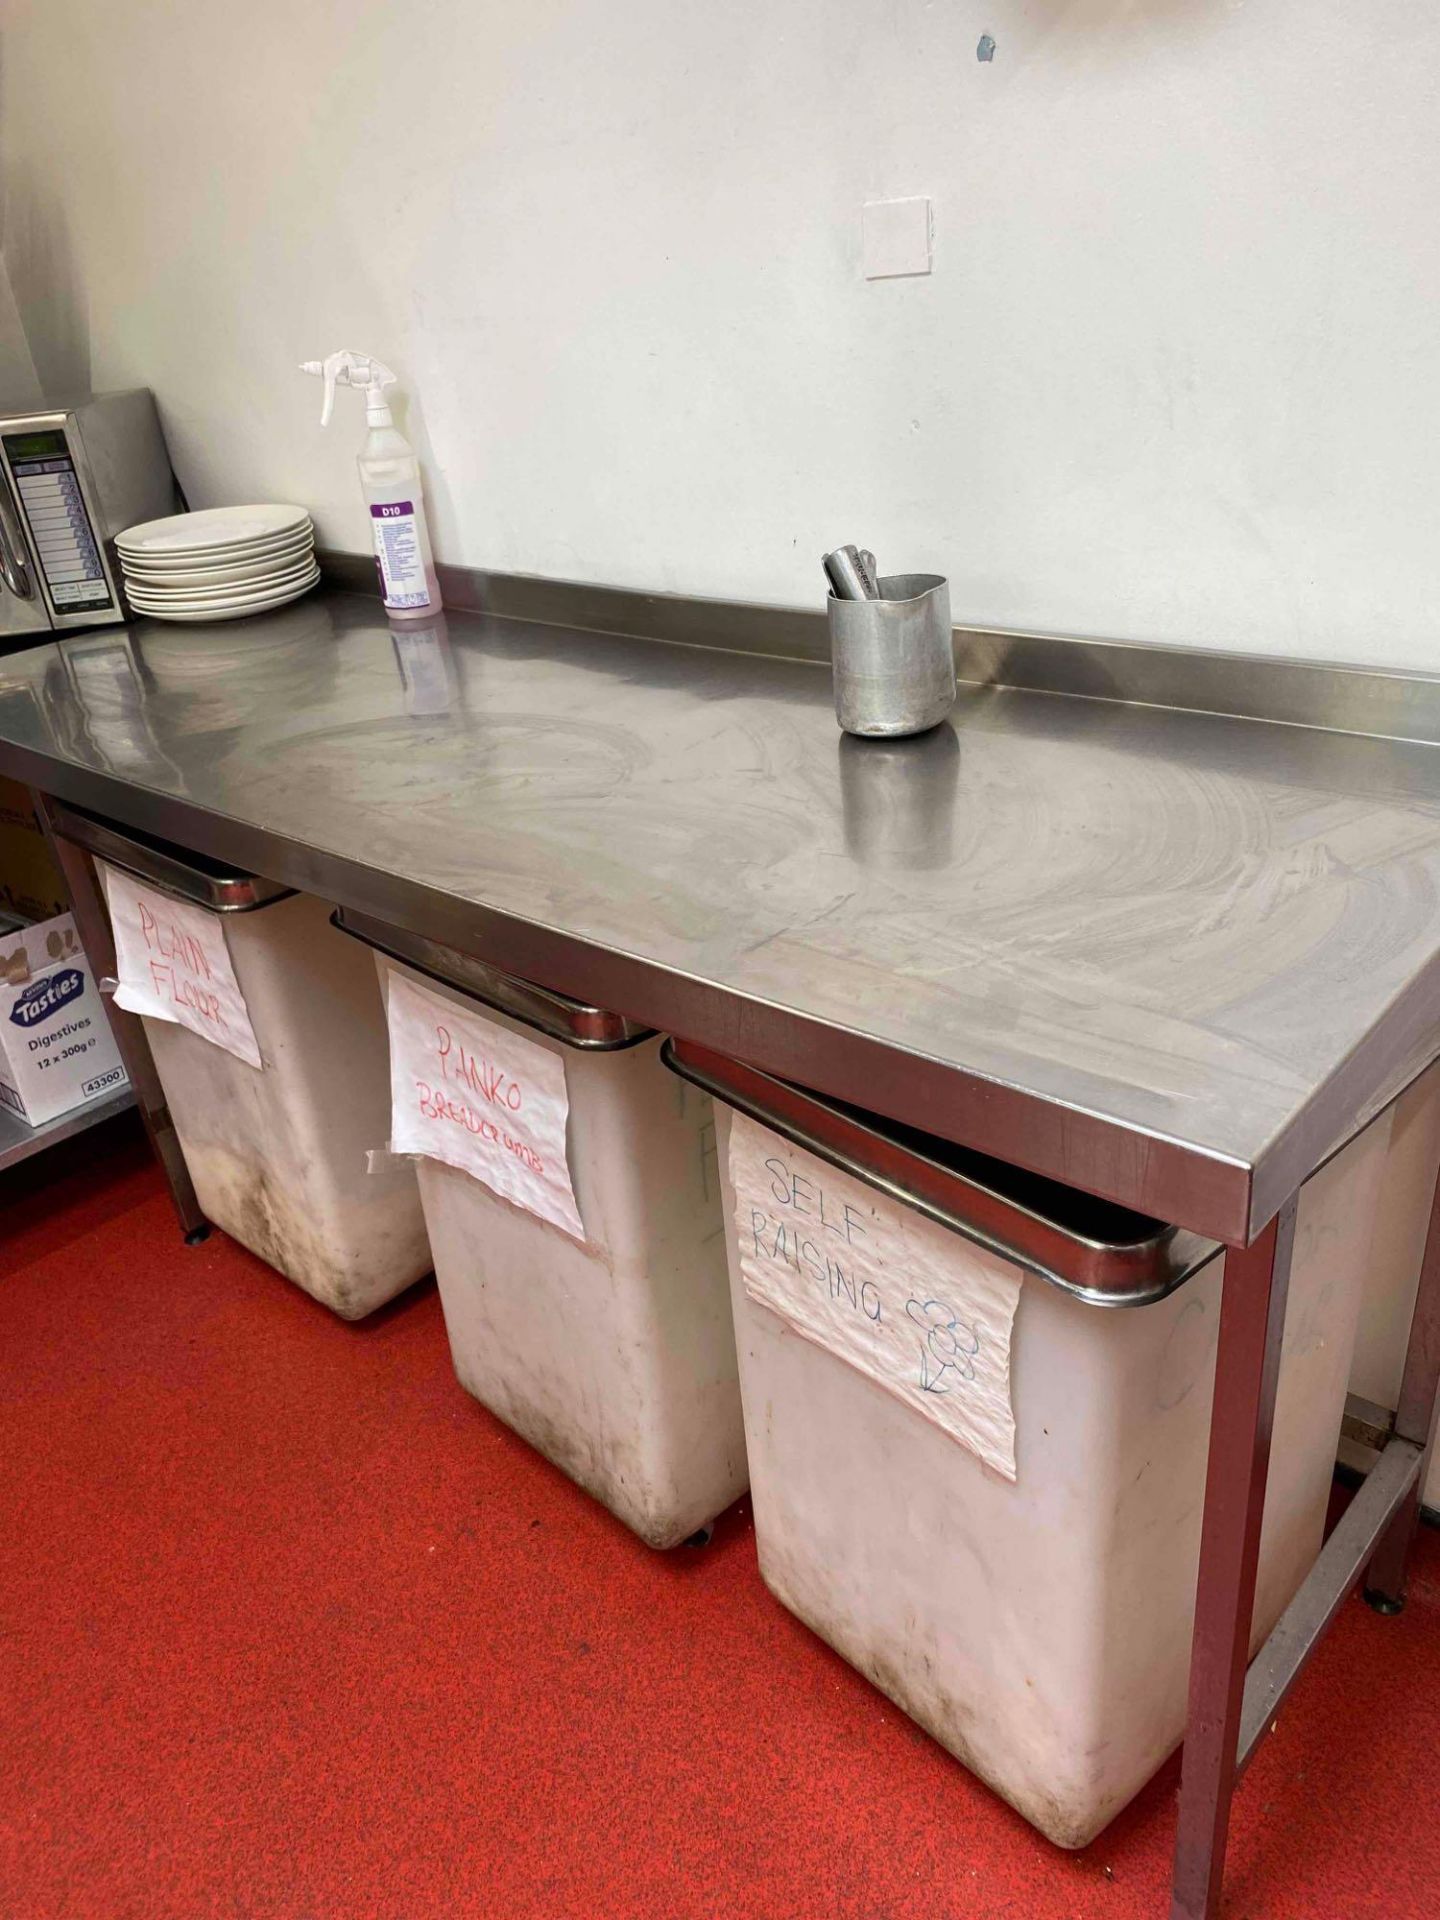 Stainless Table With Shelf And Can Opener (Kitchen)